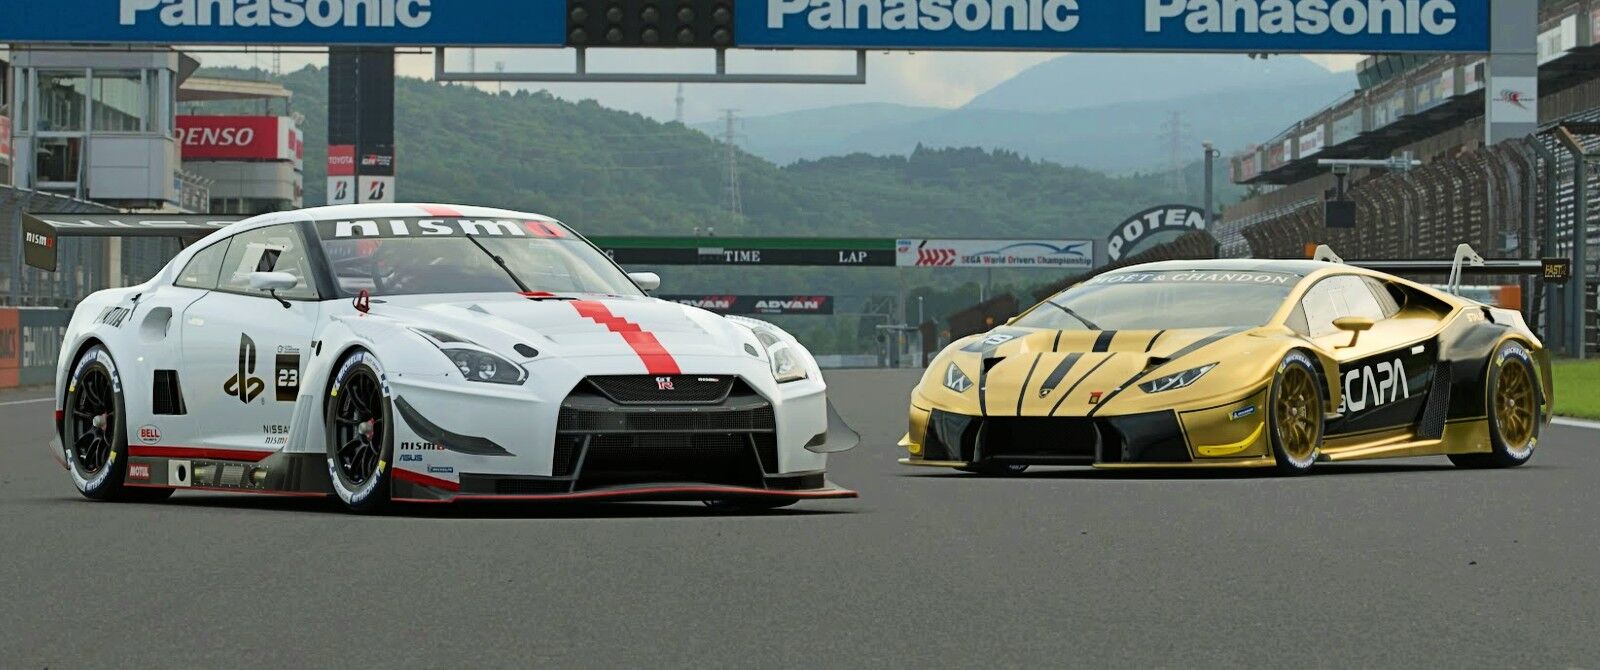 A white Nissan GT-R racecar (left) and a gold Lamborghini Huracán racecar (right) parked on a racetrack's start/finish straight.